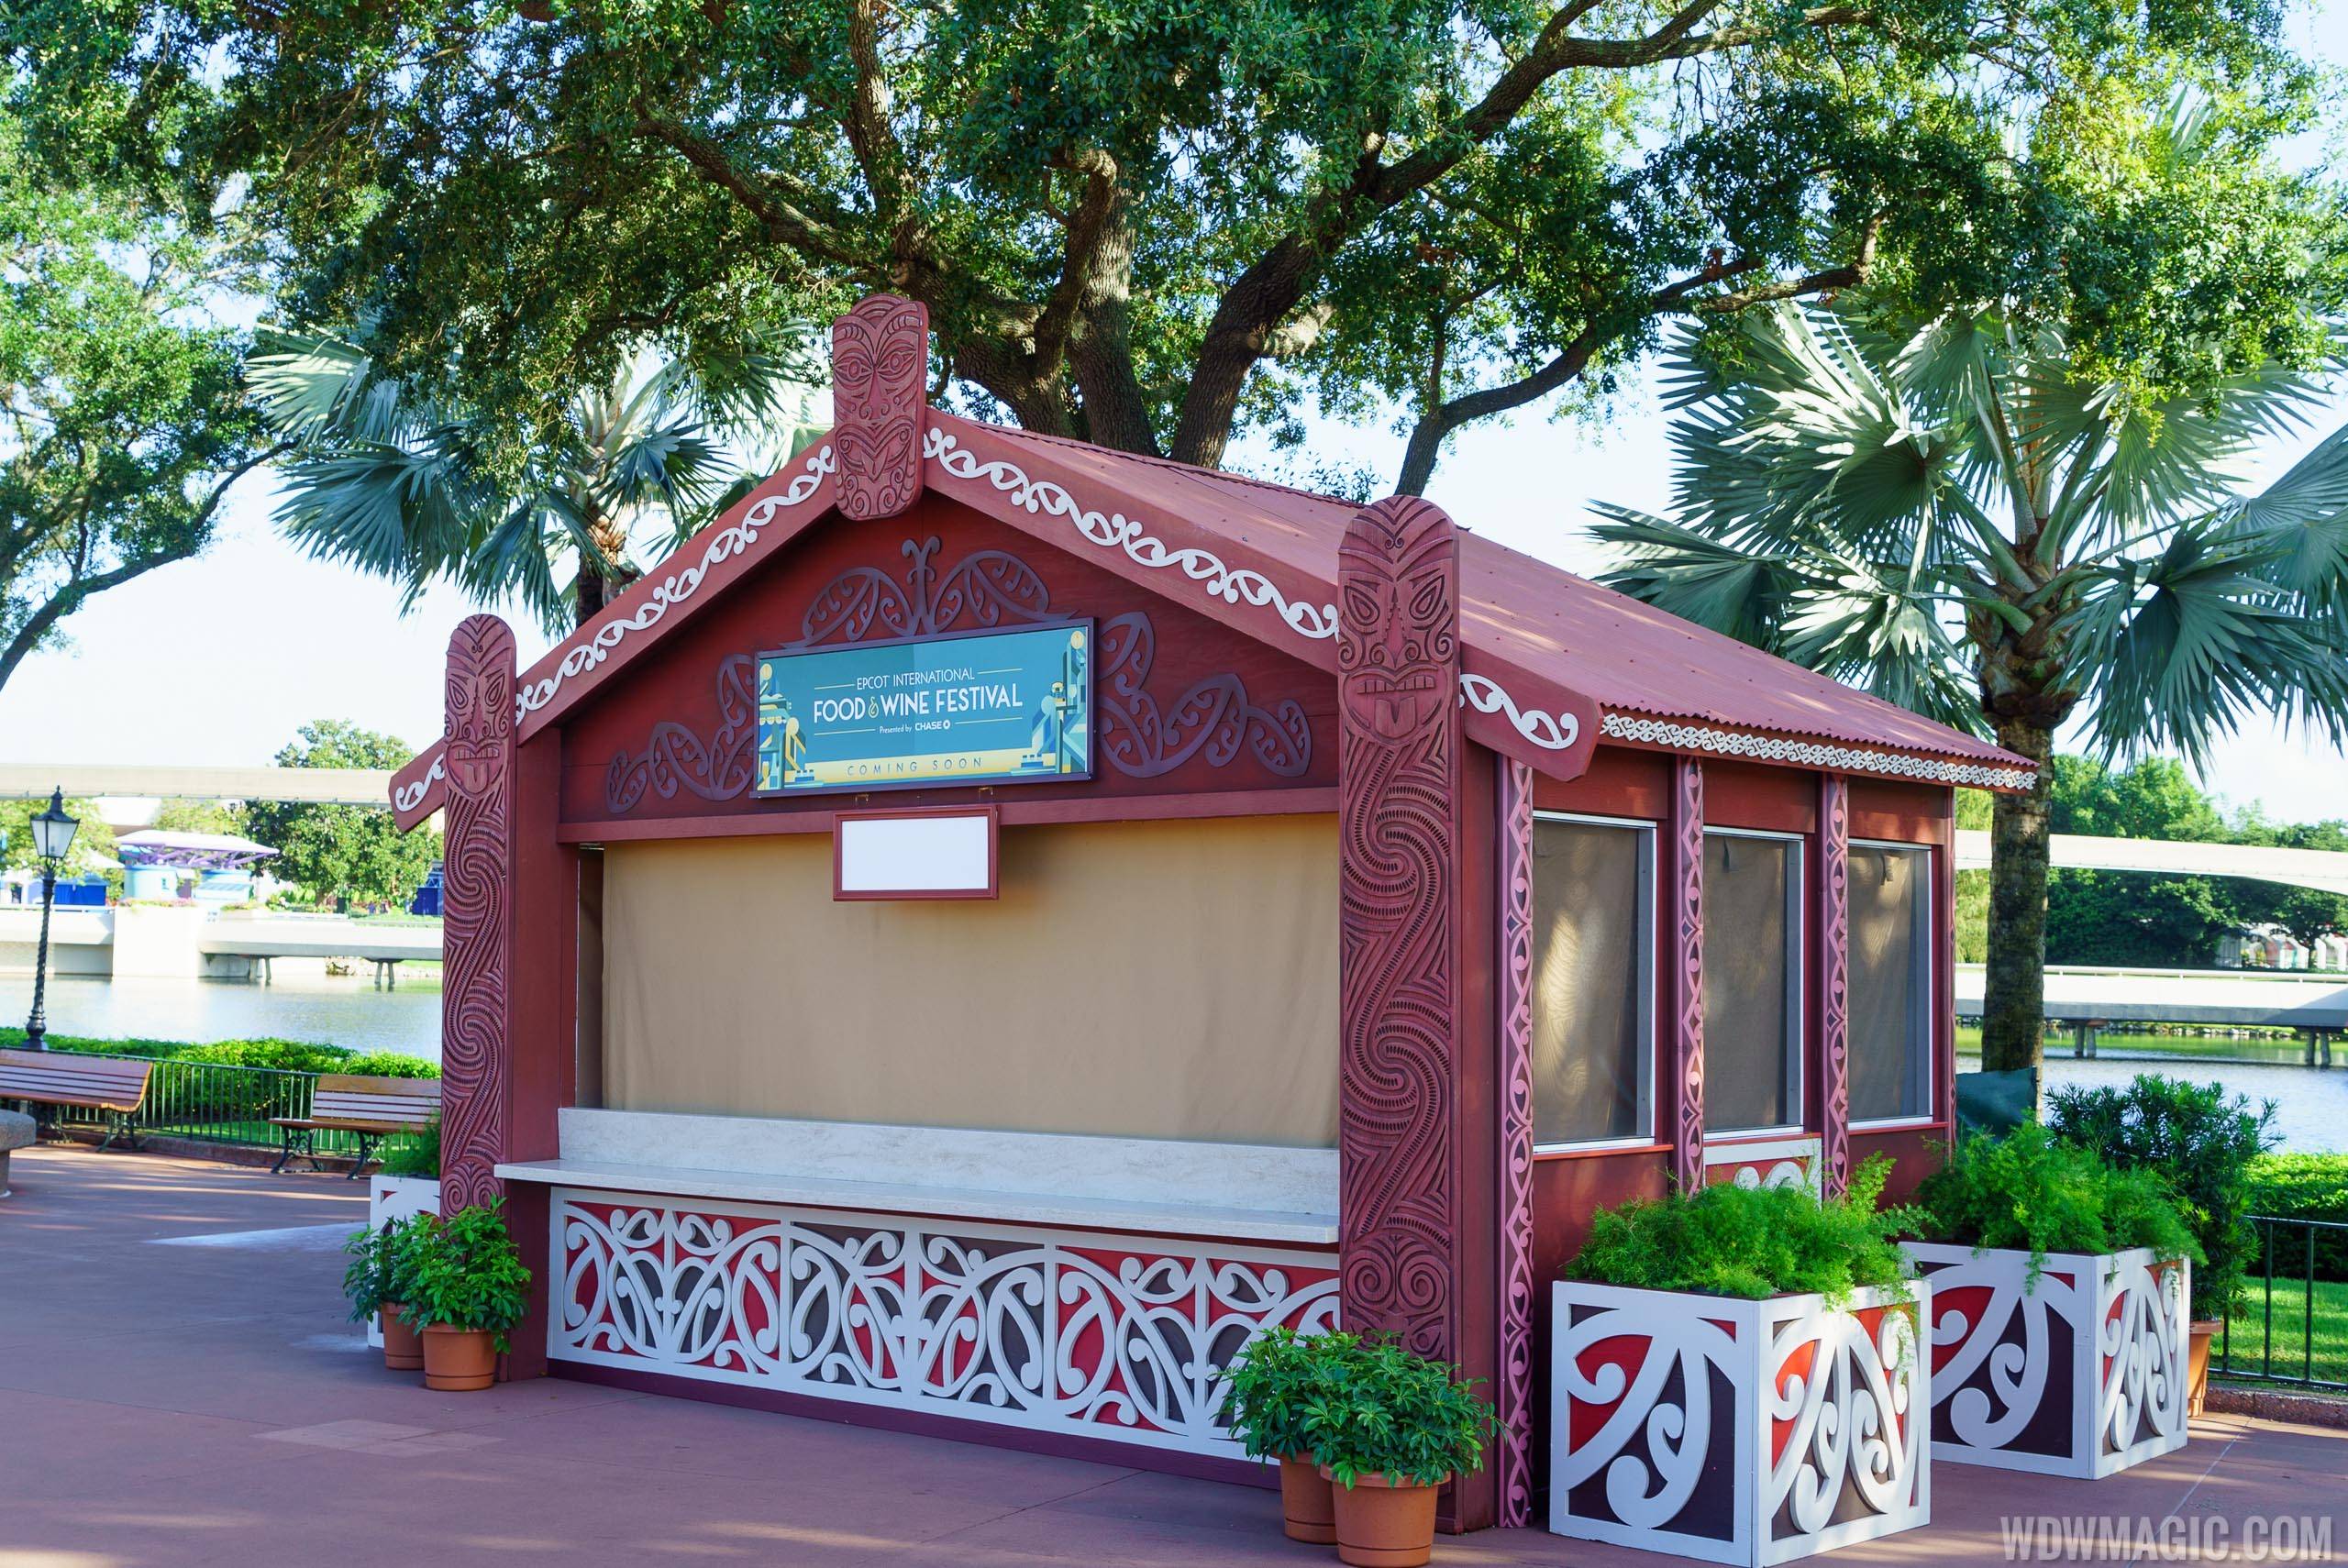 2016 Epcot Food and Wine Festival preparations